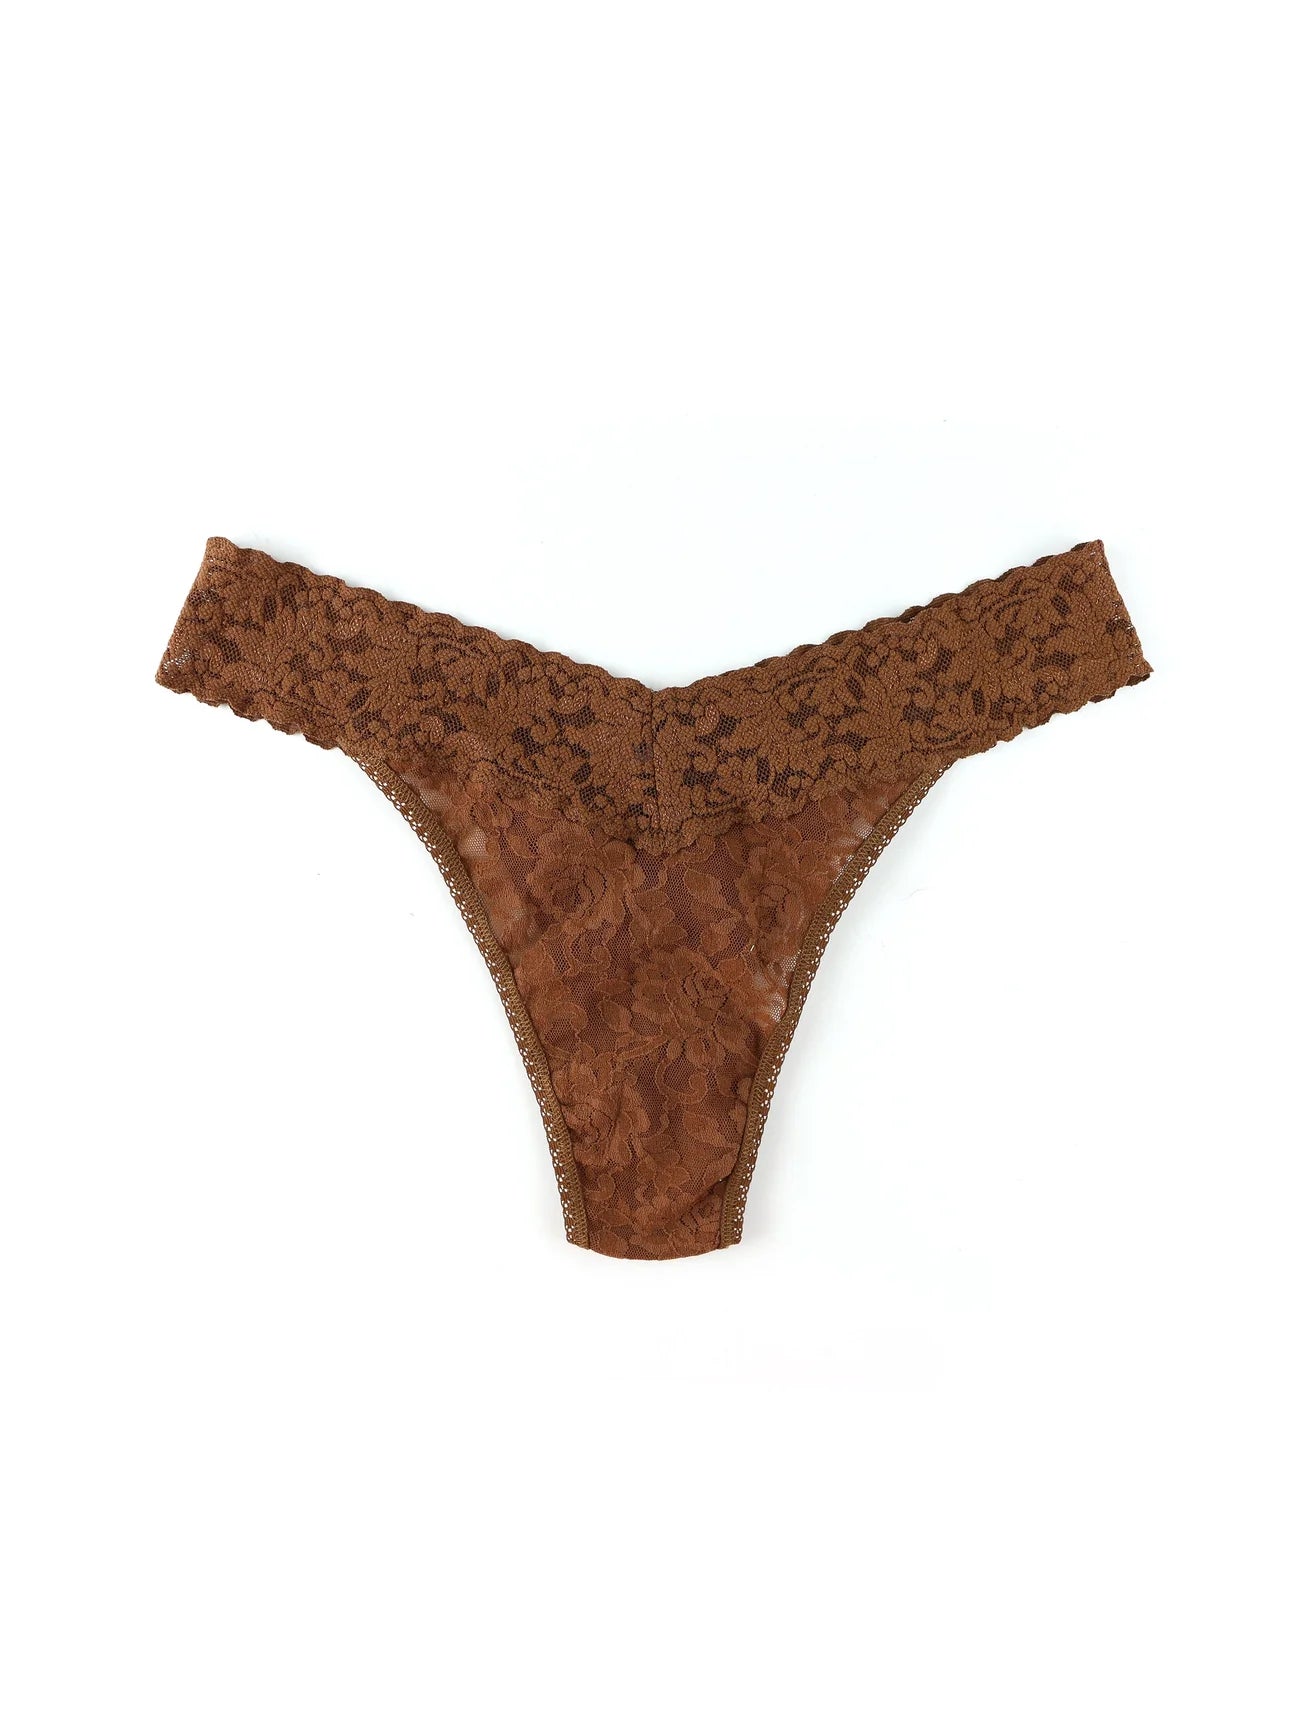 ORIGINAL RISE THONG SOLID COLORS – Expect Lace